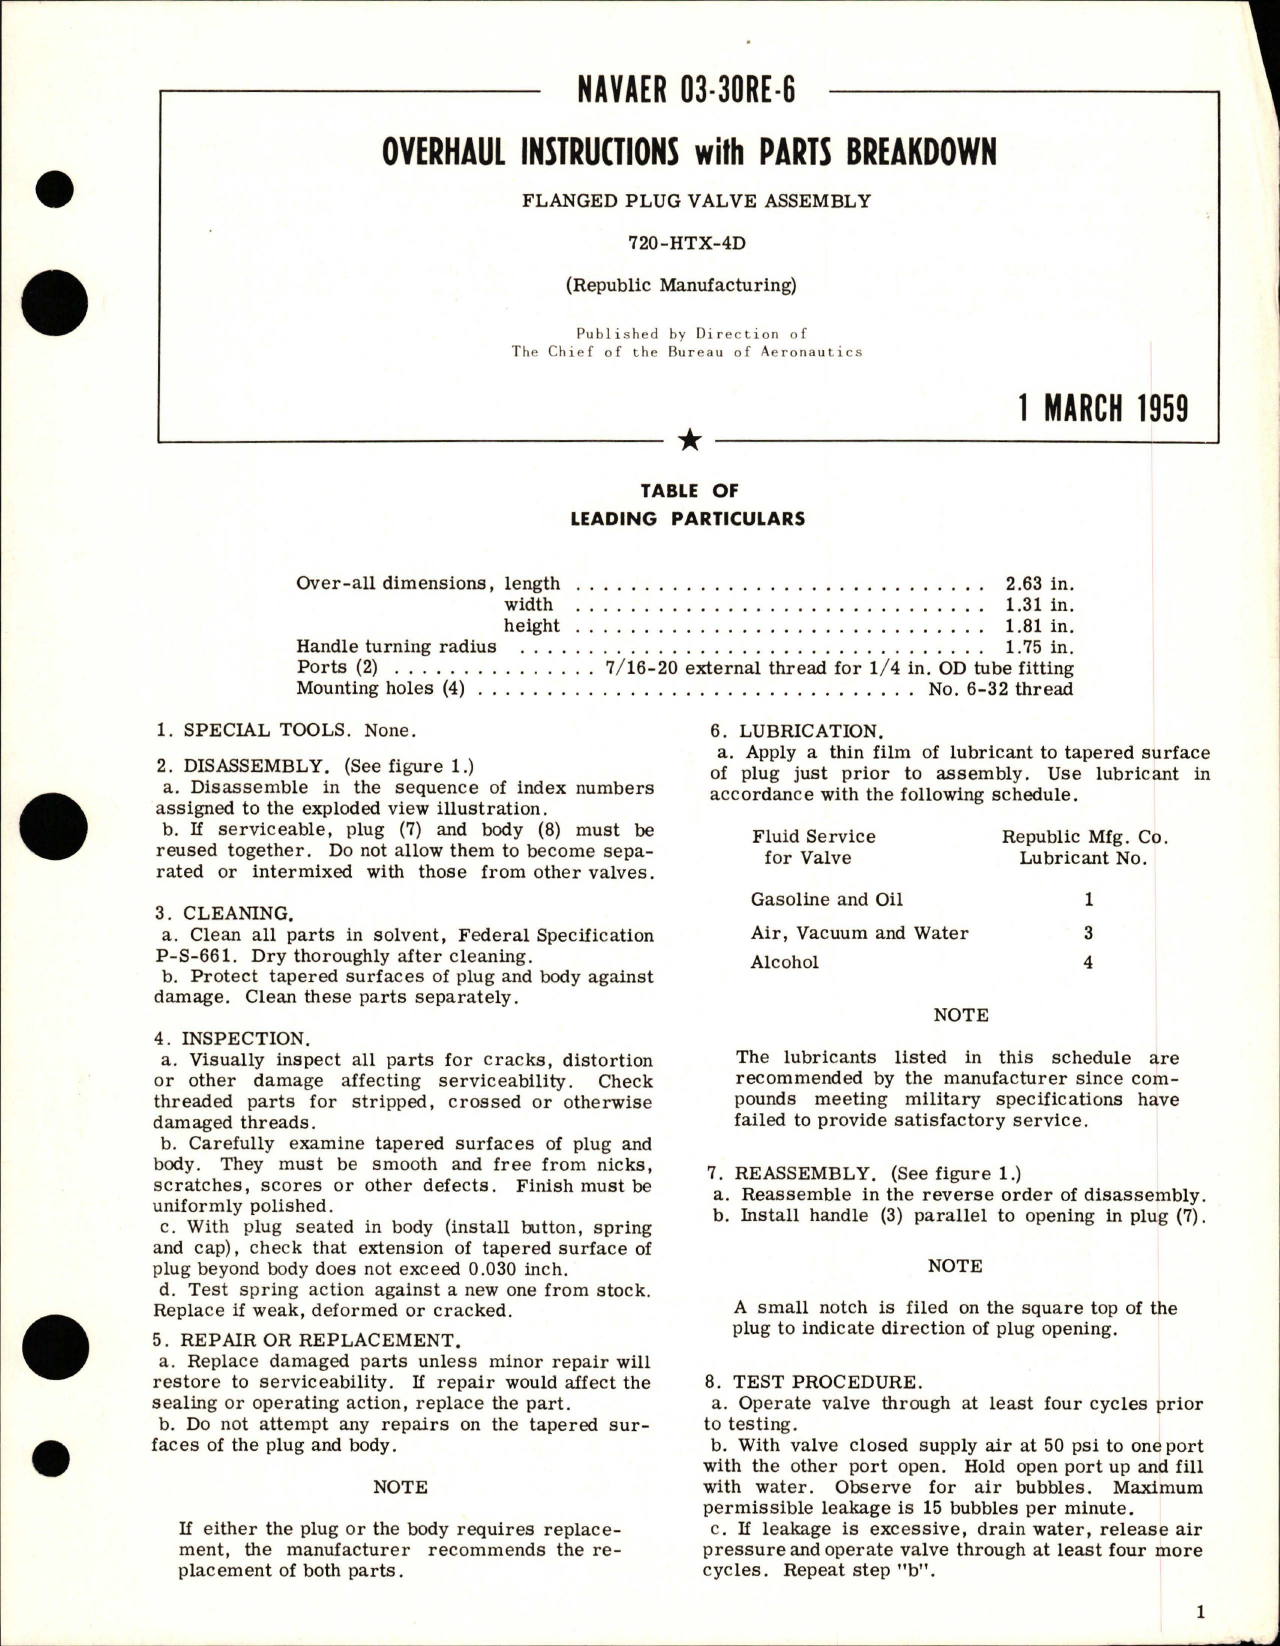 Sample page 1 from AirCorps Library document: Overhaul Instructions with Parts Breakdown for Flanged Plug Valve Assembly - 720-HTX-4D